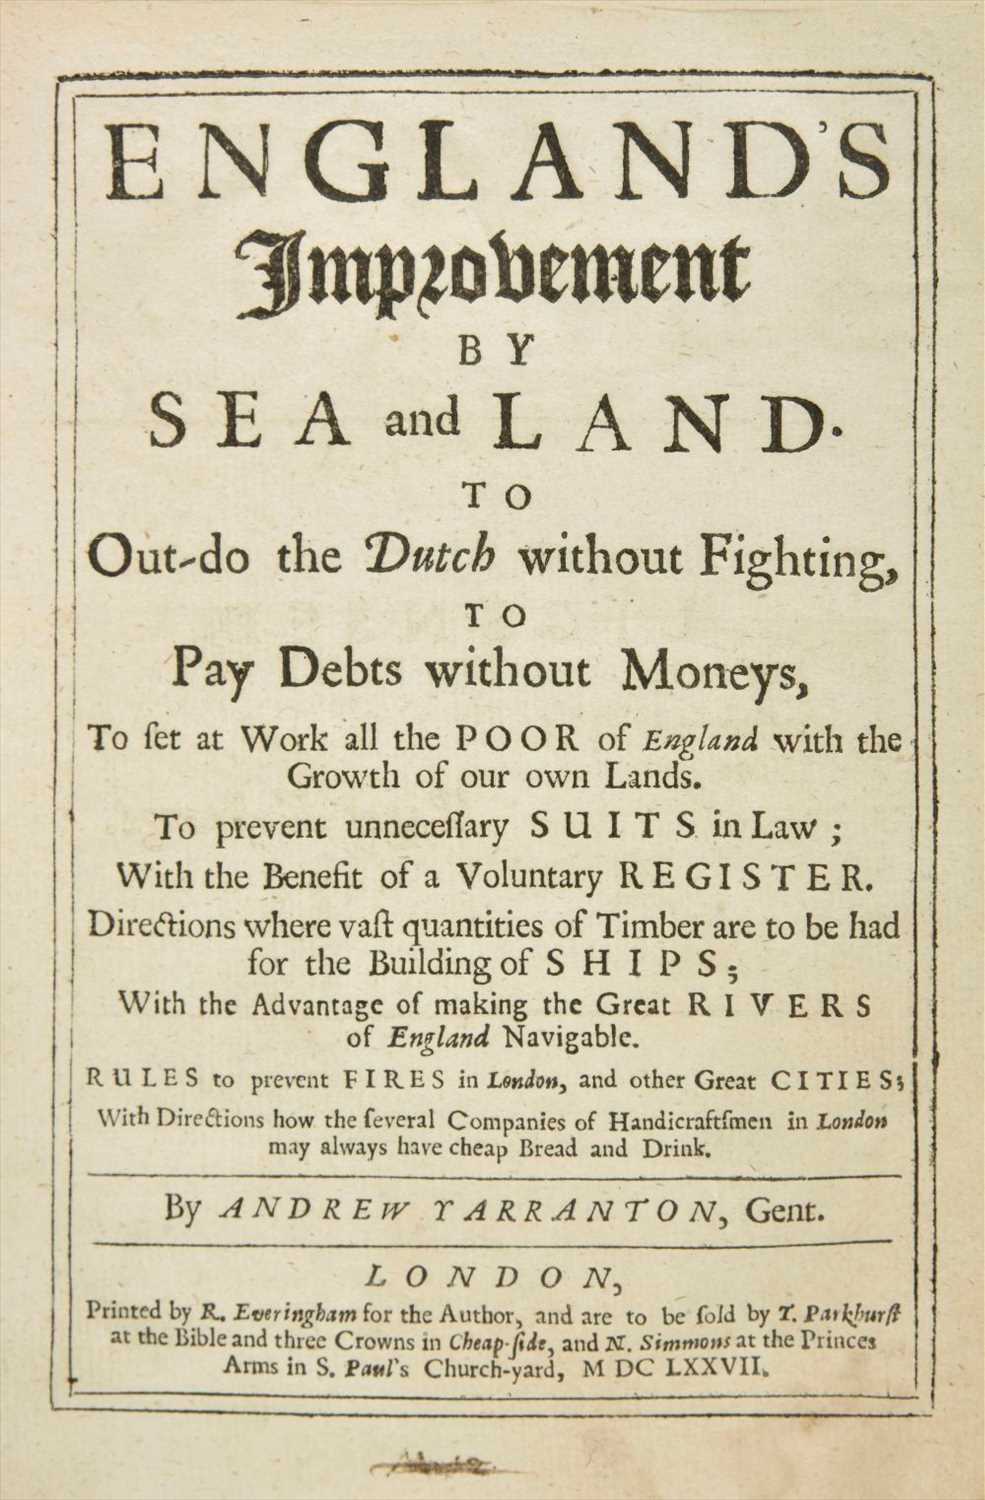 Lot 287 - Yarranton (Andrew). England's Improvement by Sea and Land, part 1 only, 1677